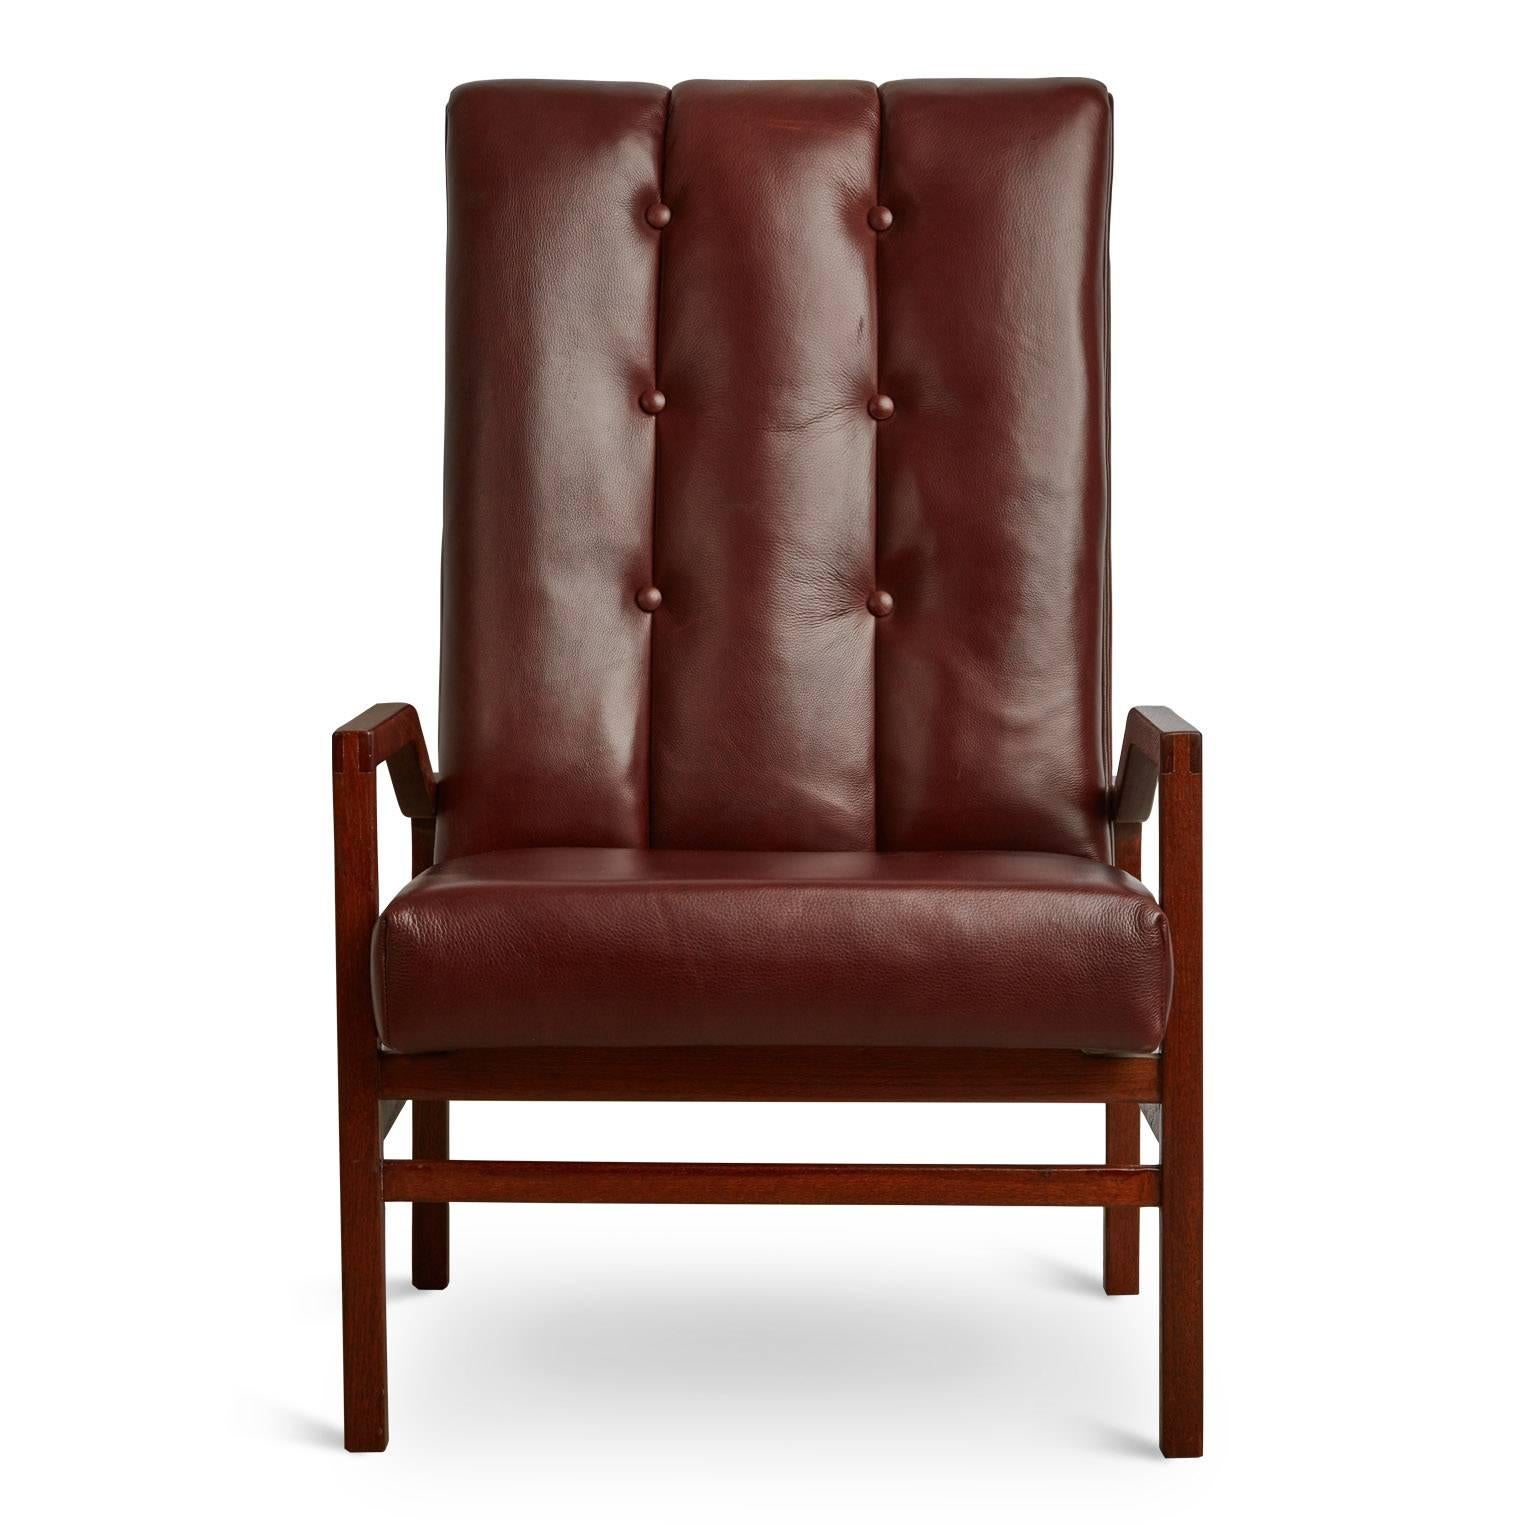 Pair of recently restored Danish Modern high back armchairs. Comprised of a newly refinished solid teak frame and recently reupholstered button tufted high-back seats in a full grain burgundy leather.

These elegant side chairs would be ideal for a